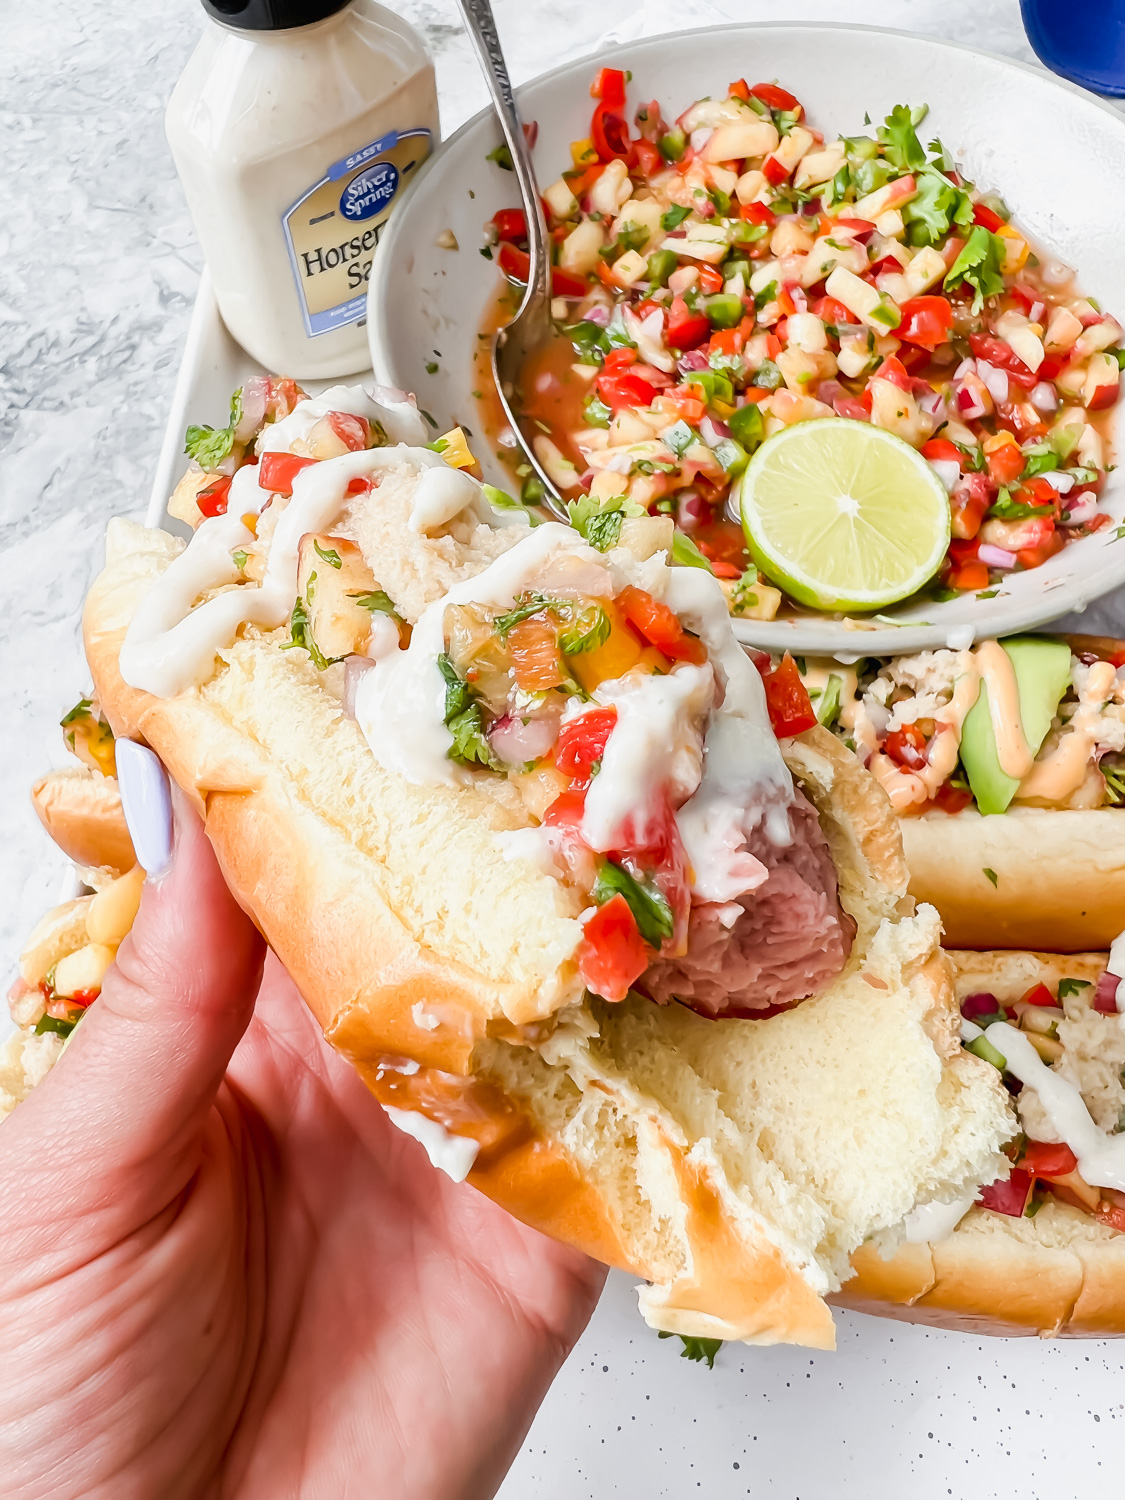 close up shot of hot dog in white bun garnished with jalapeno peach salsa and horseradish with a bite taken out with big white bowl of additional salsa in background.